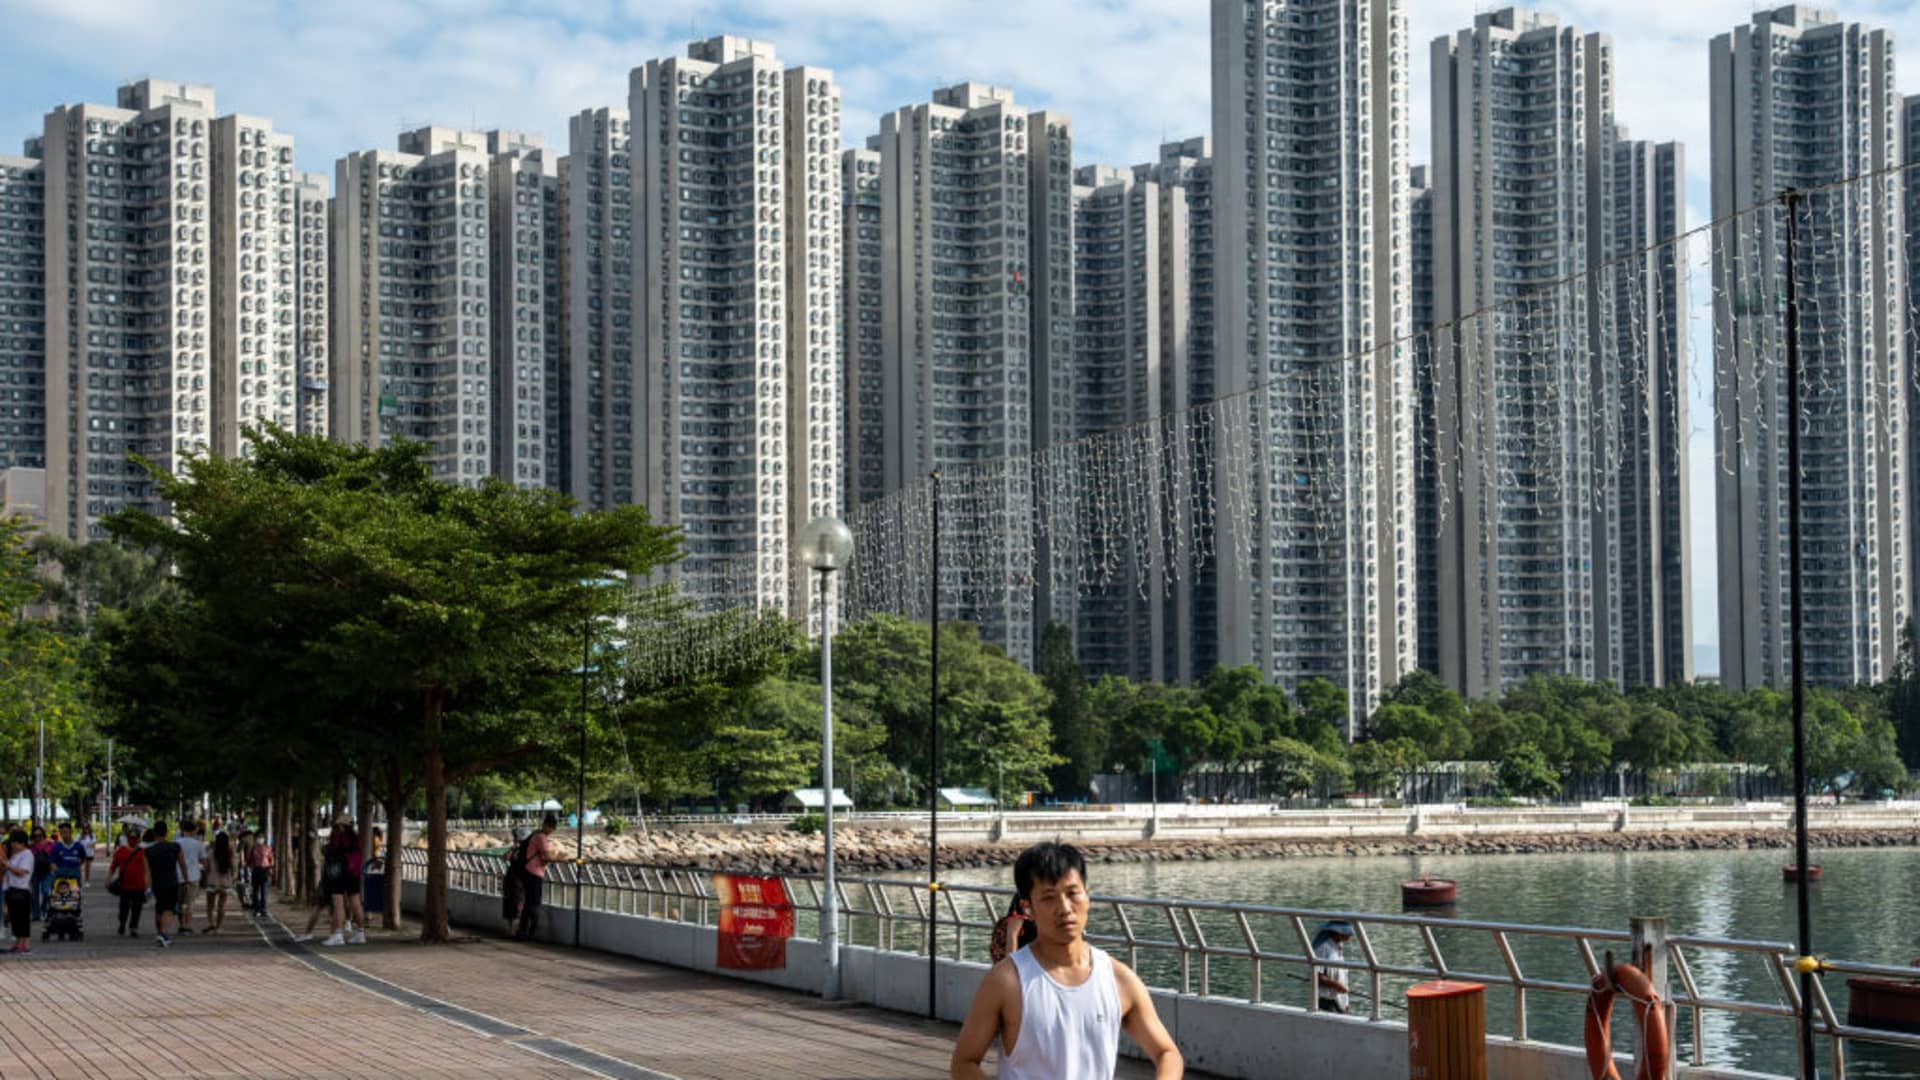 Hong Kong’s property prices won’t pop any time soon. Here’s why